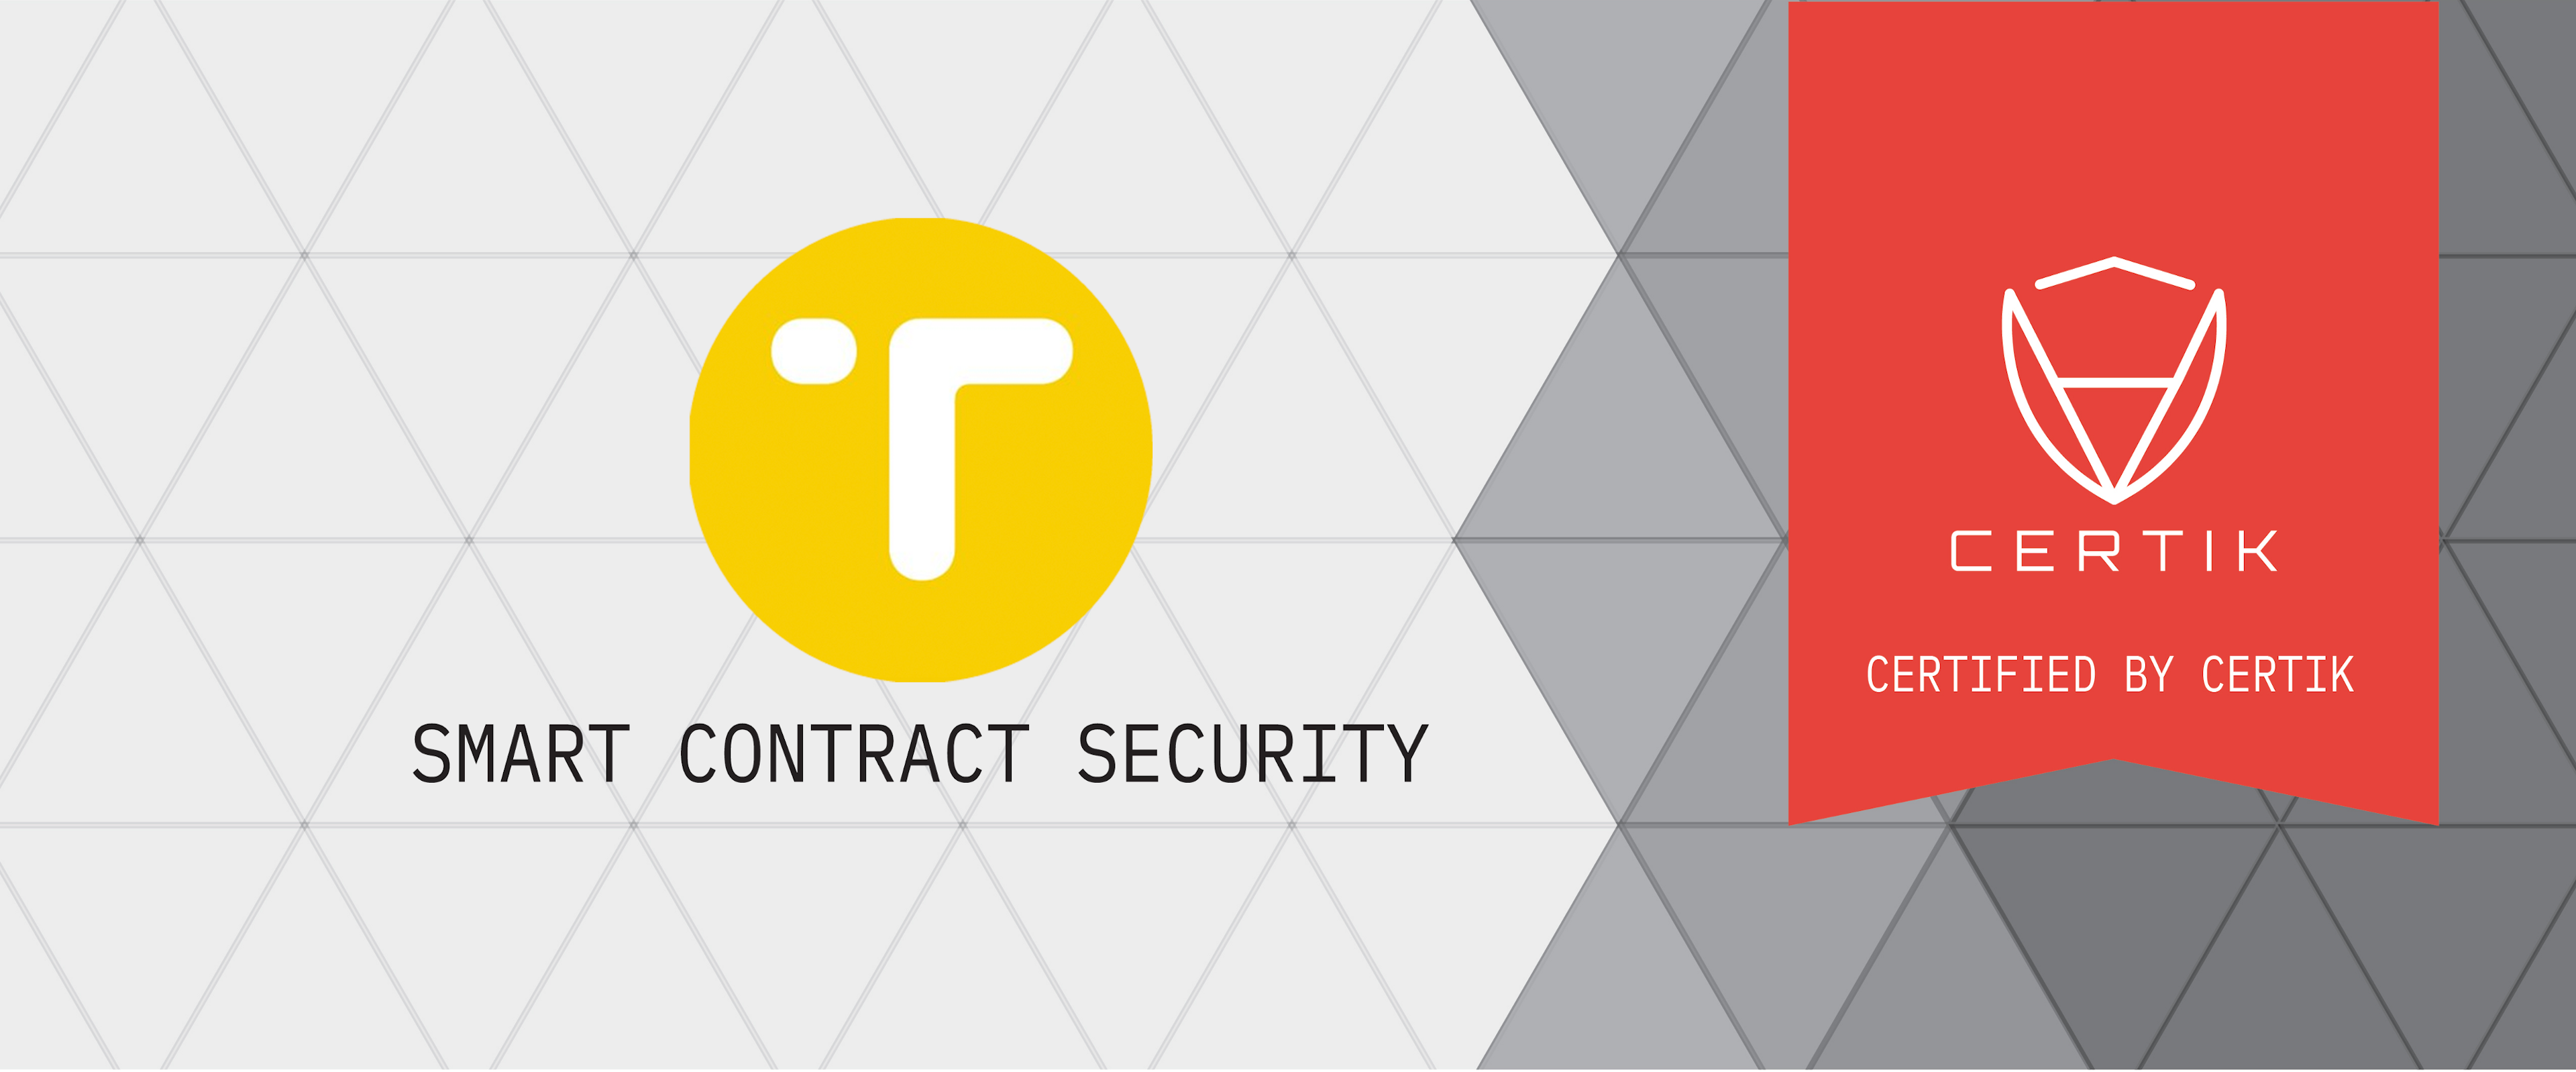 CertiK has secured Top Network’s smart contract prior to a successful Token Listing